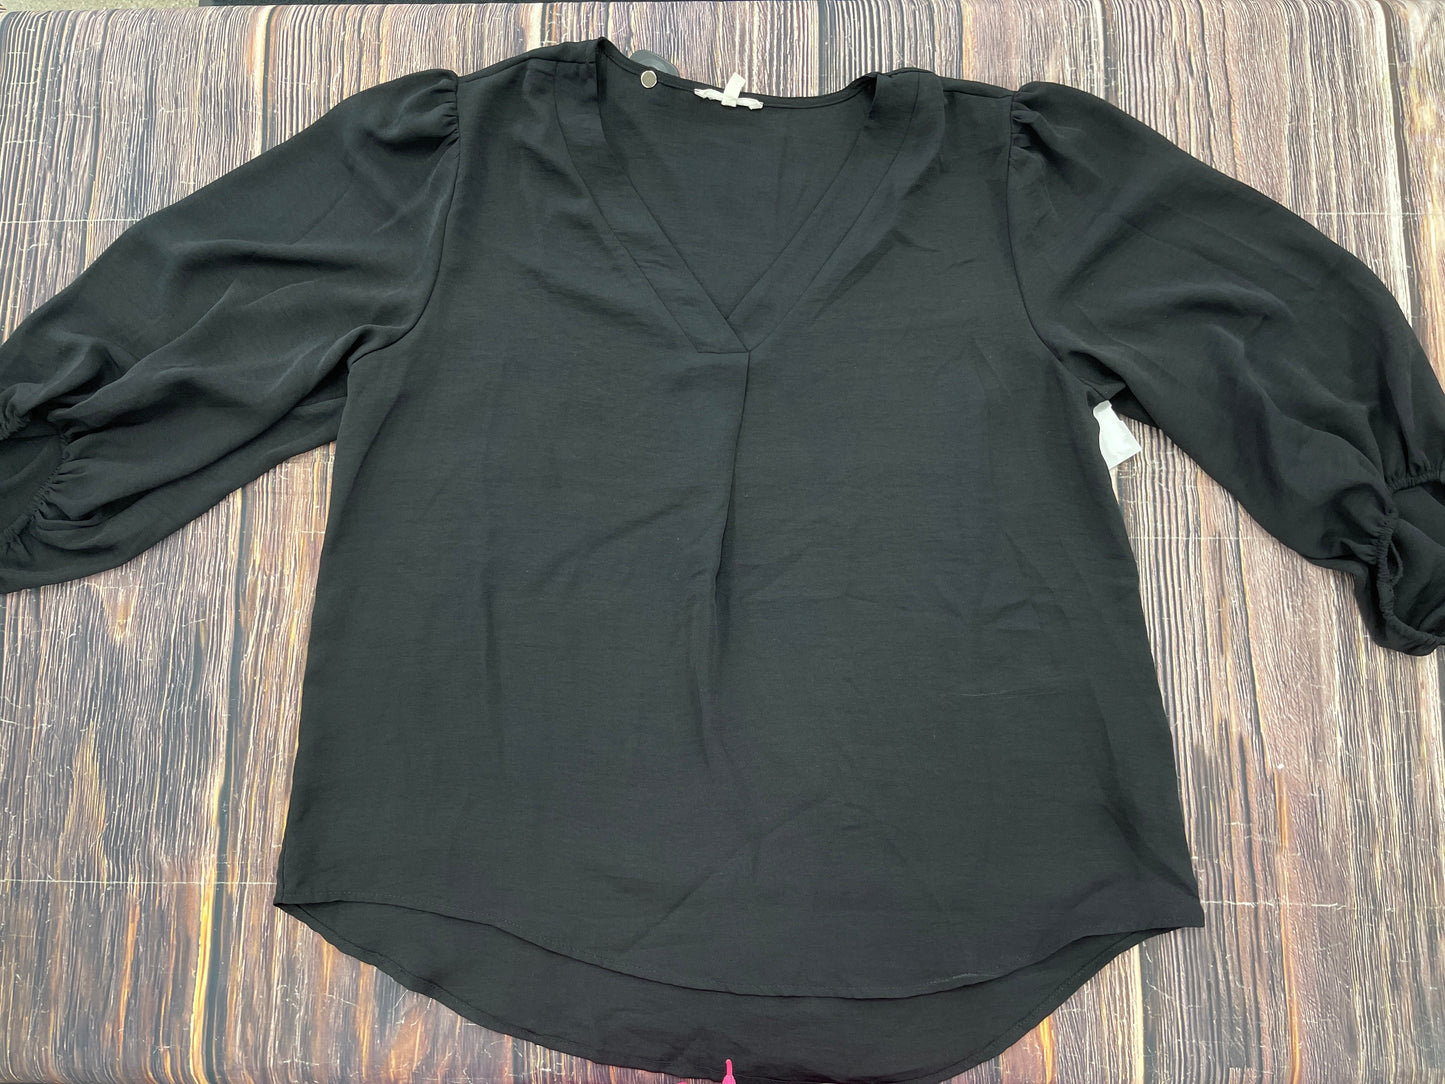 Black Top 3/4 Sleeve Maurices, Size L